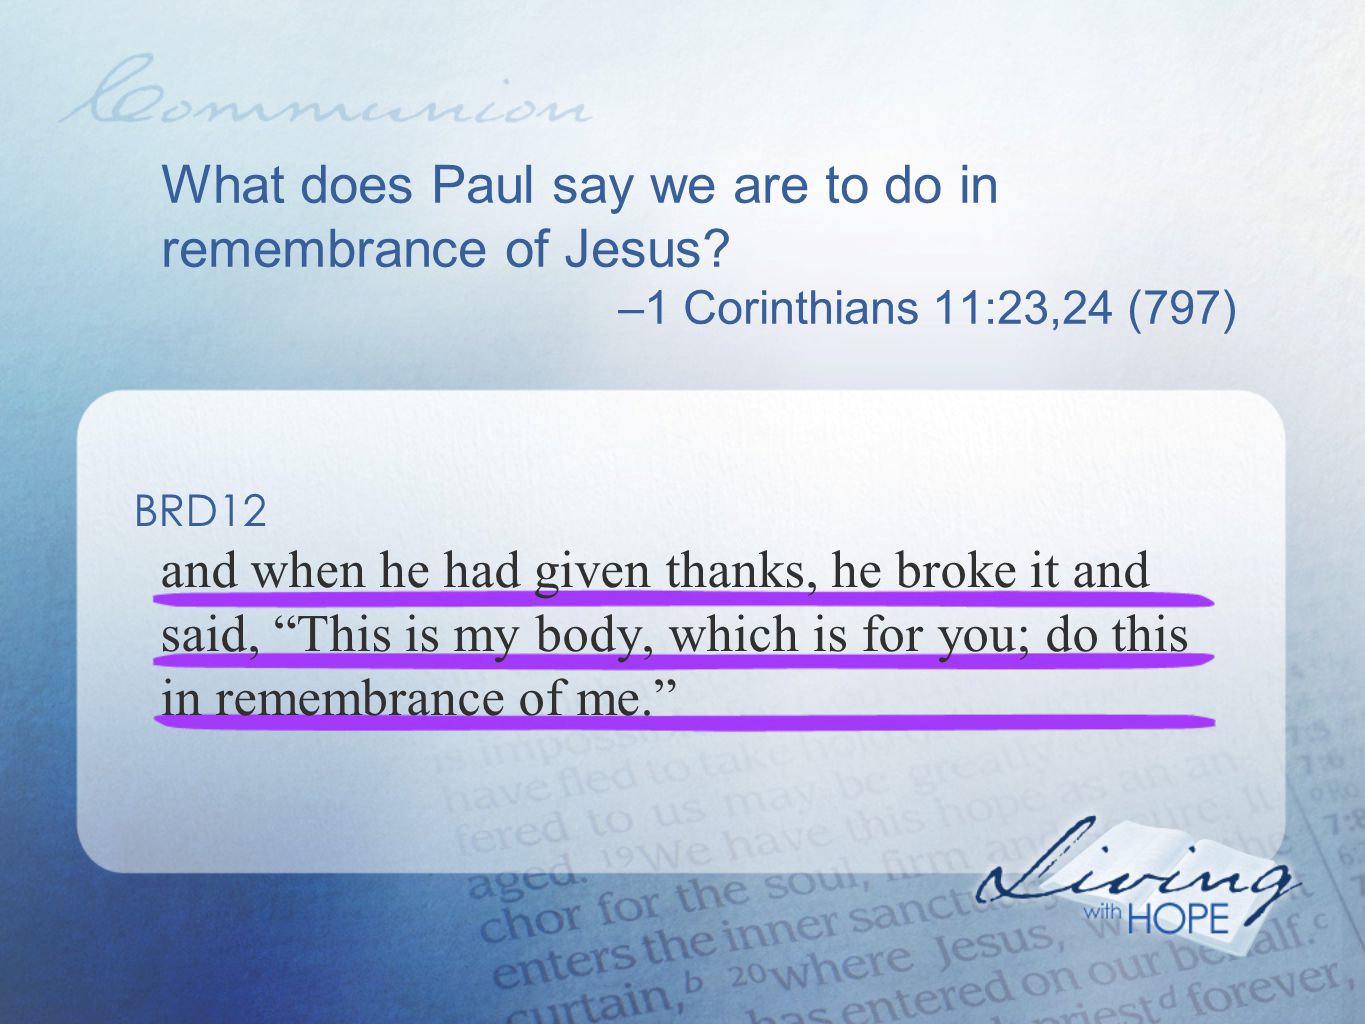 What does Paul say we are to do in remembrance of Jesus